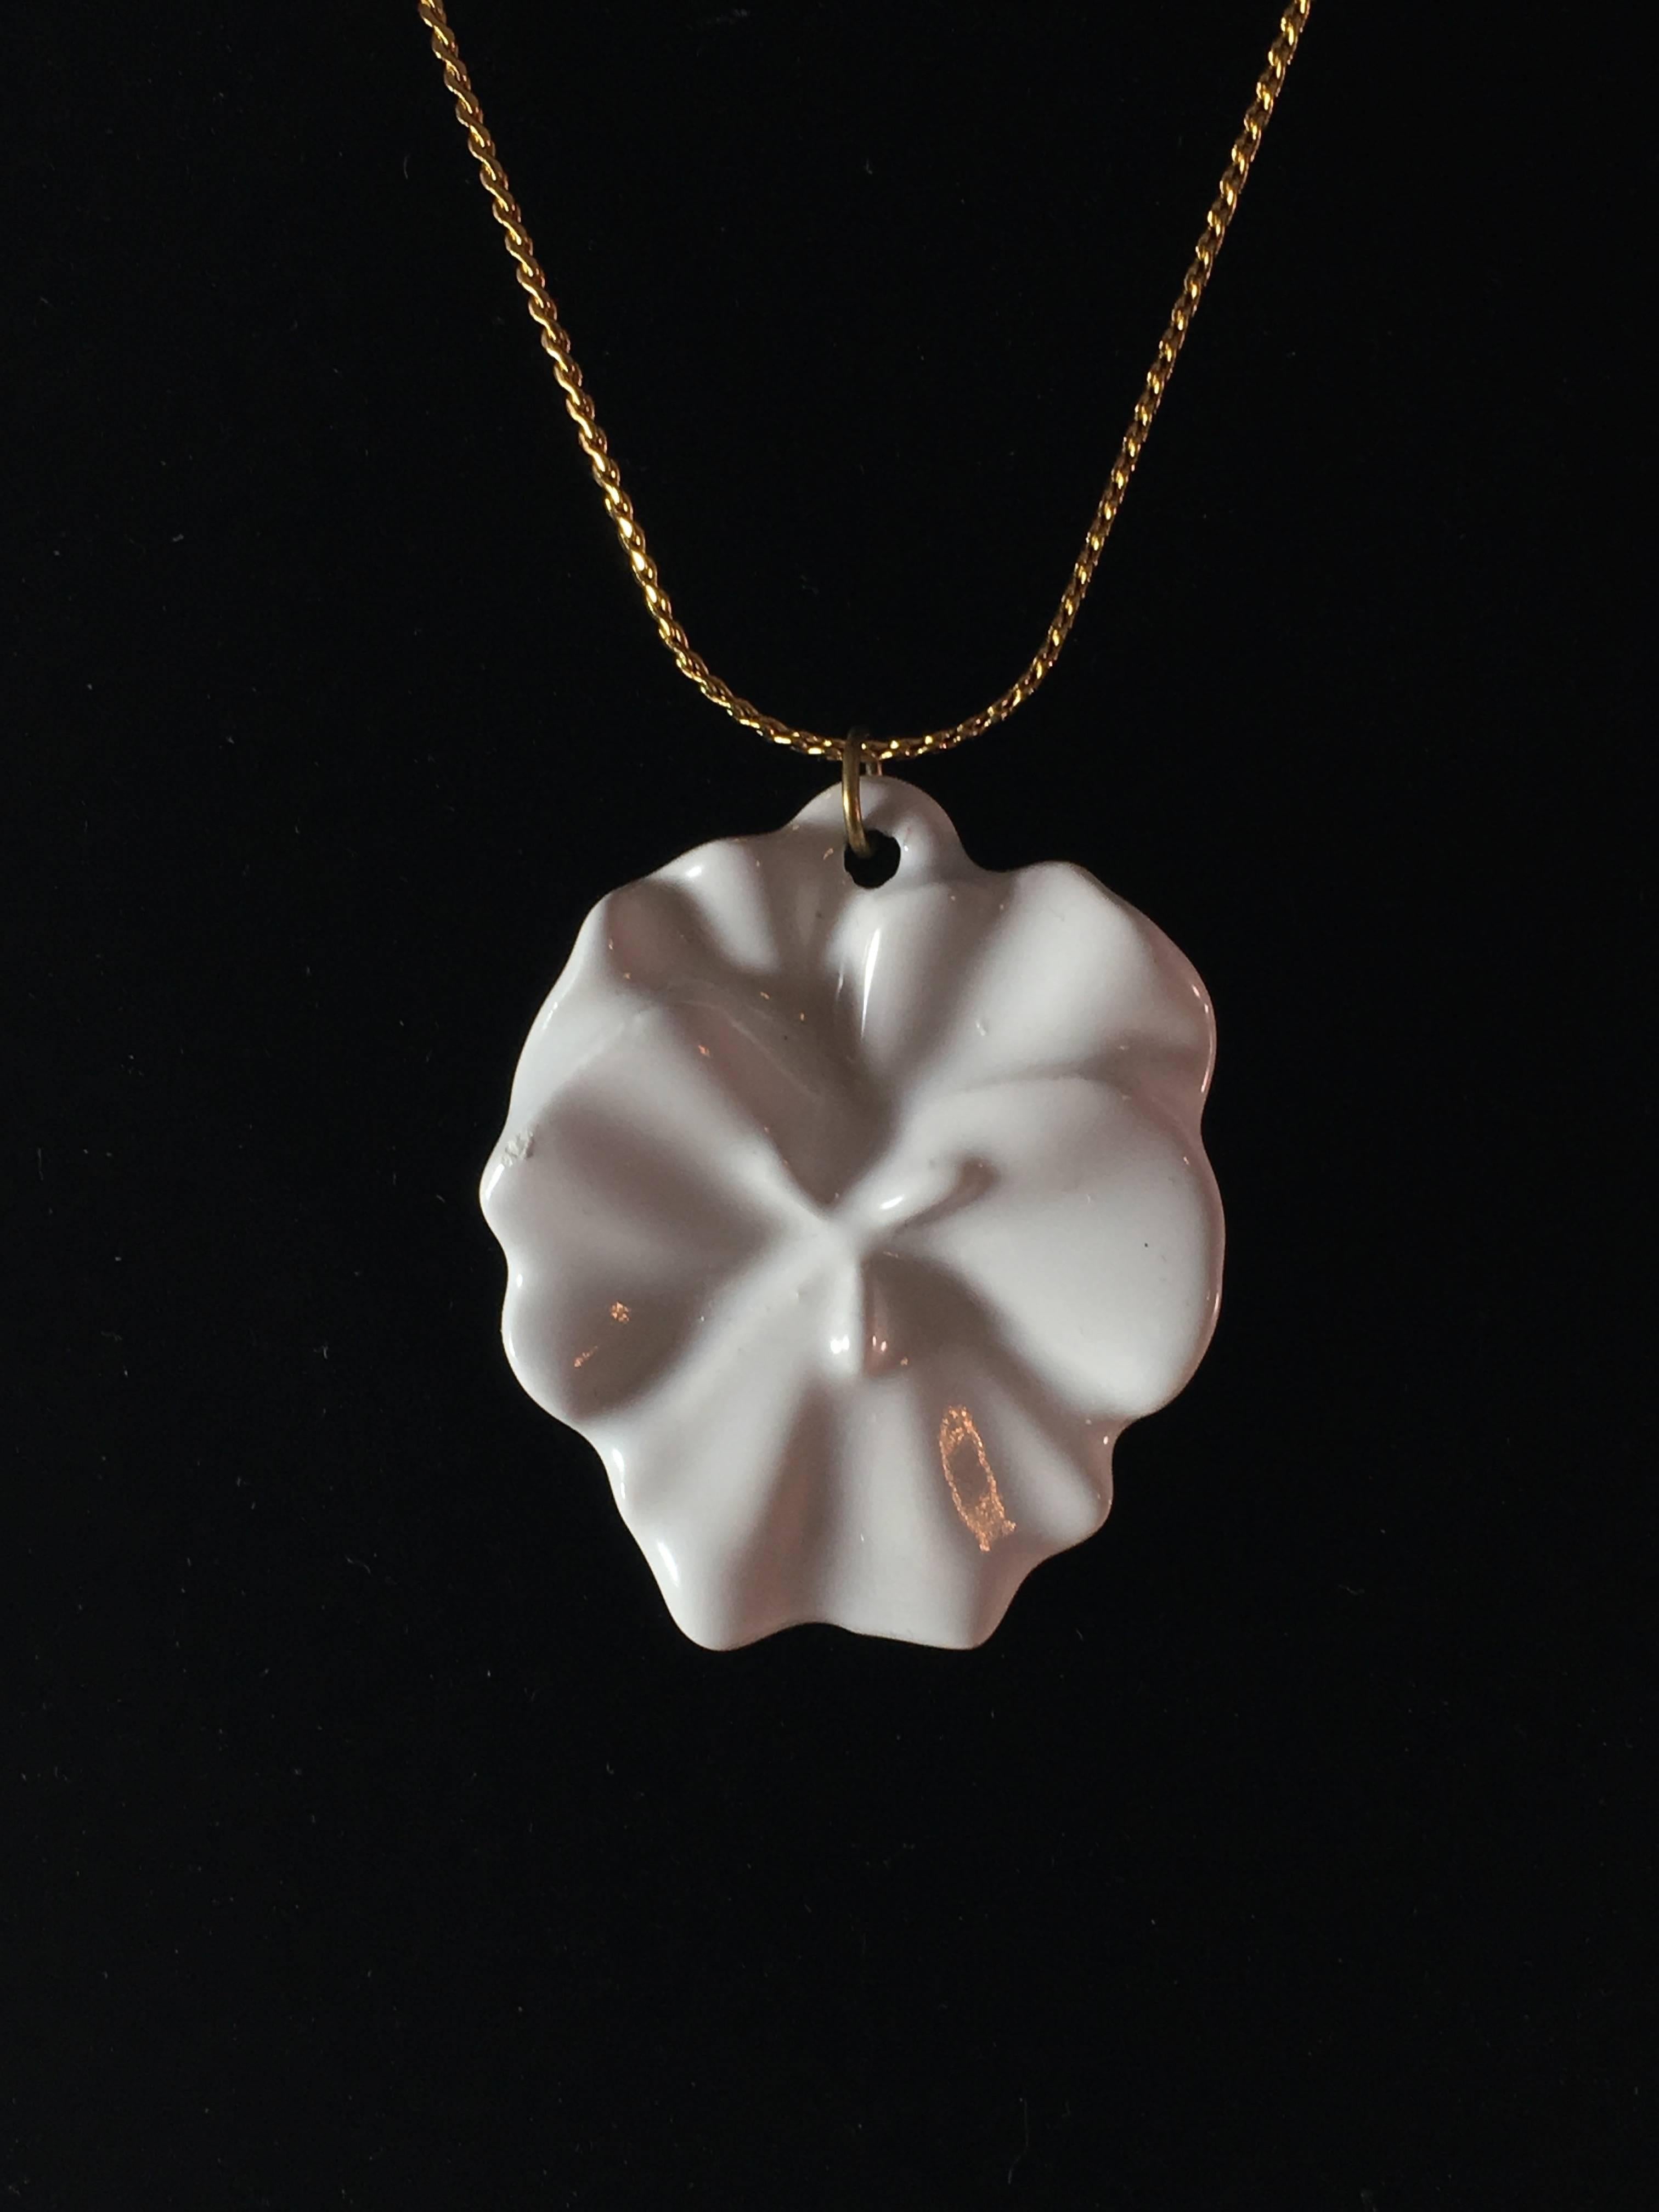 This is a unique 1970s white porcelain pendant flower necklace designed by Kenneth Jay Lane for Adrian. It is not marked on the necklace but has its original hang tag which says, 'Adrian brings you something by Kenneth Jay Lane'. The pendant is